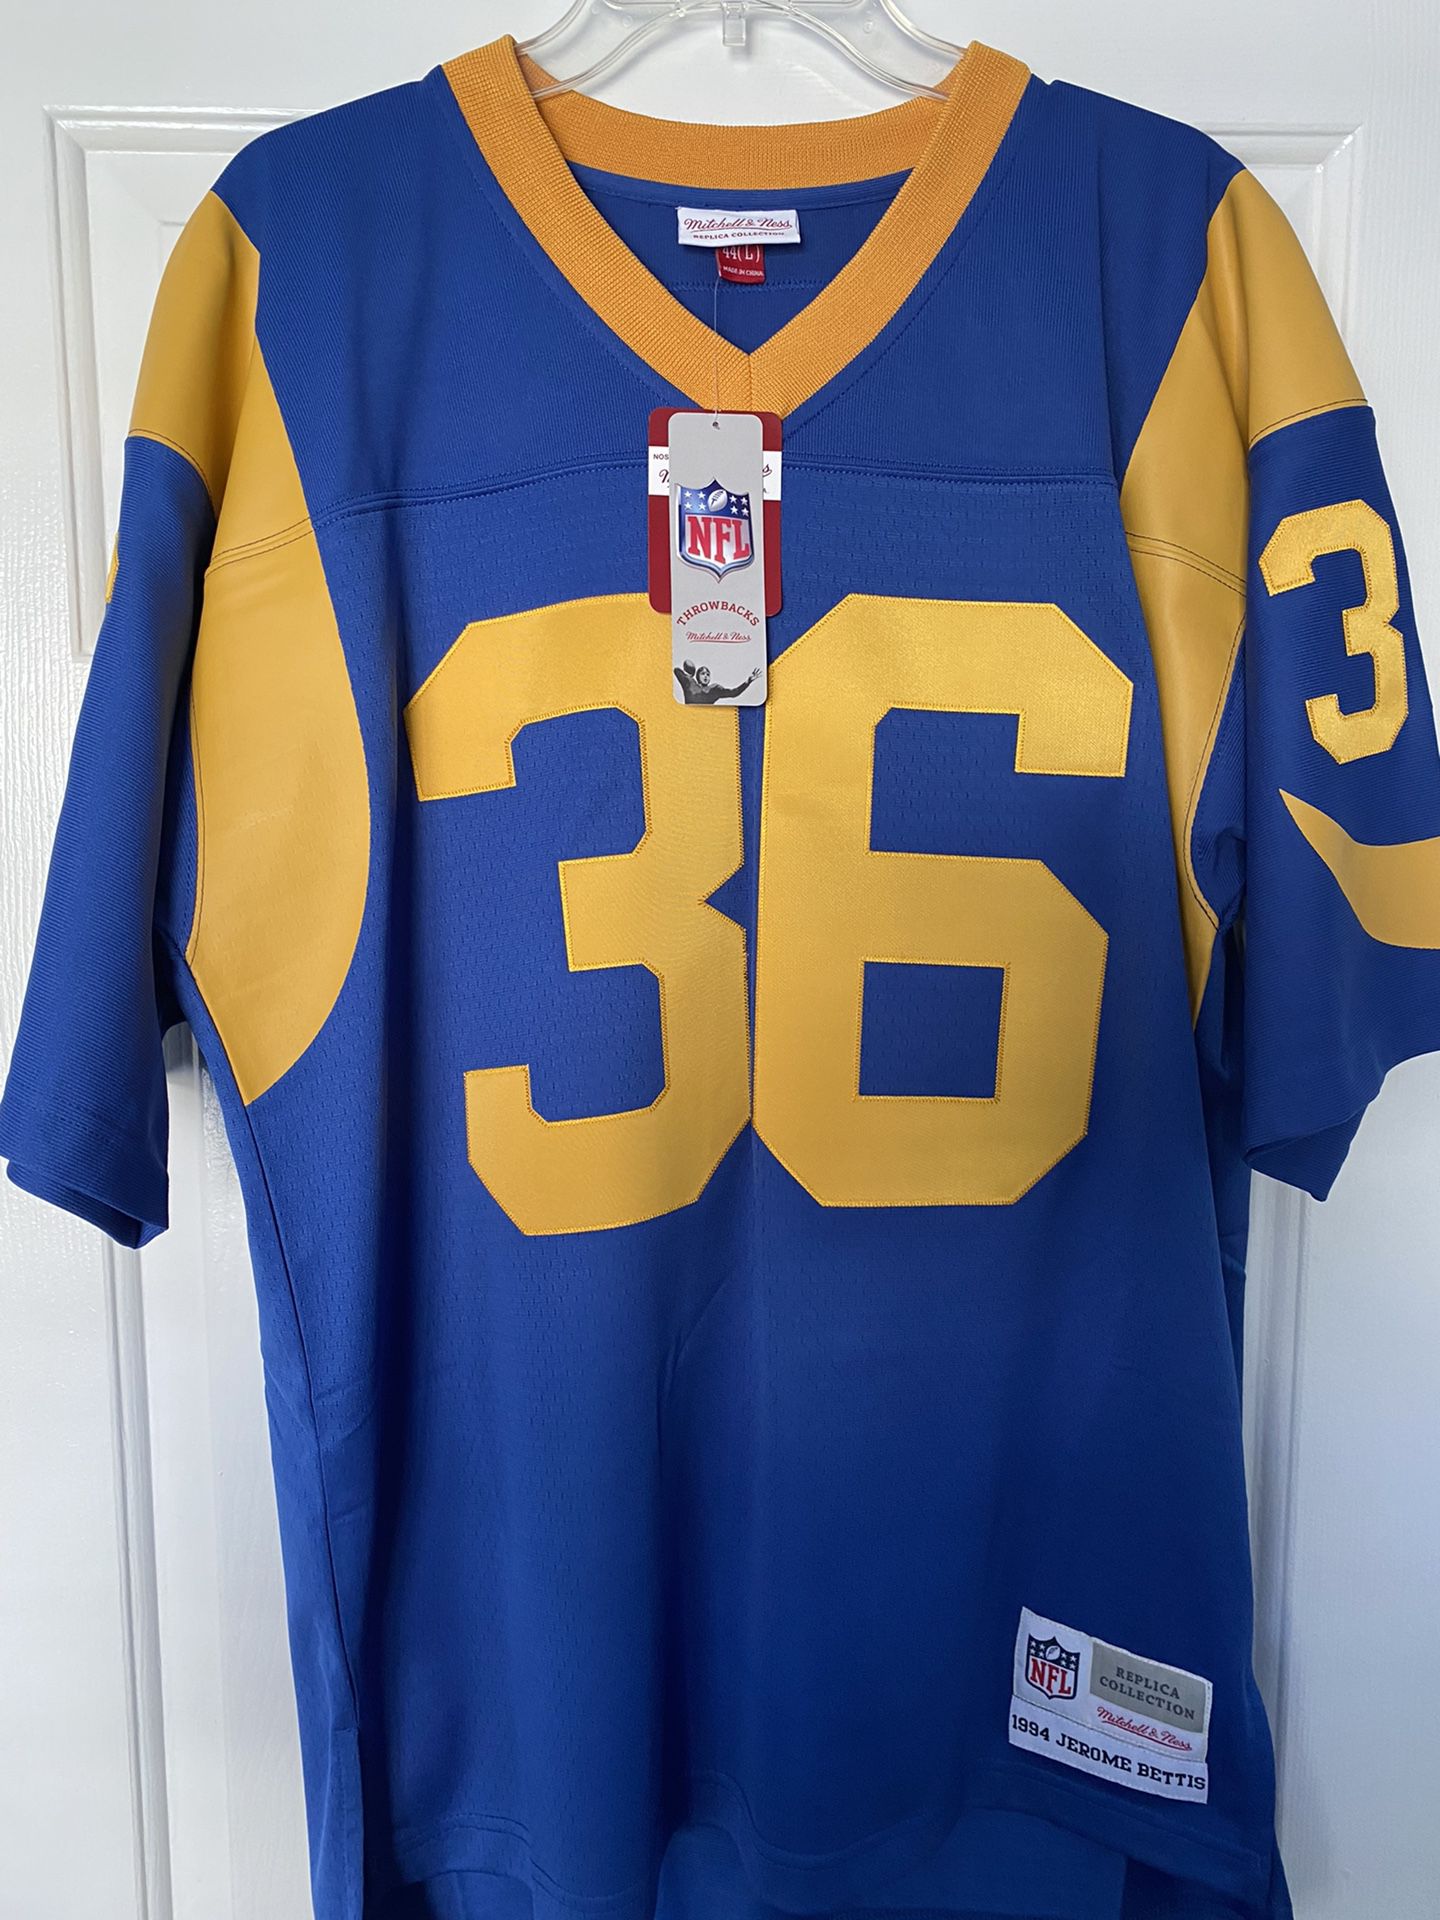 Rams Jersey for Sale in Fontana, CA - OfferUp